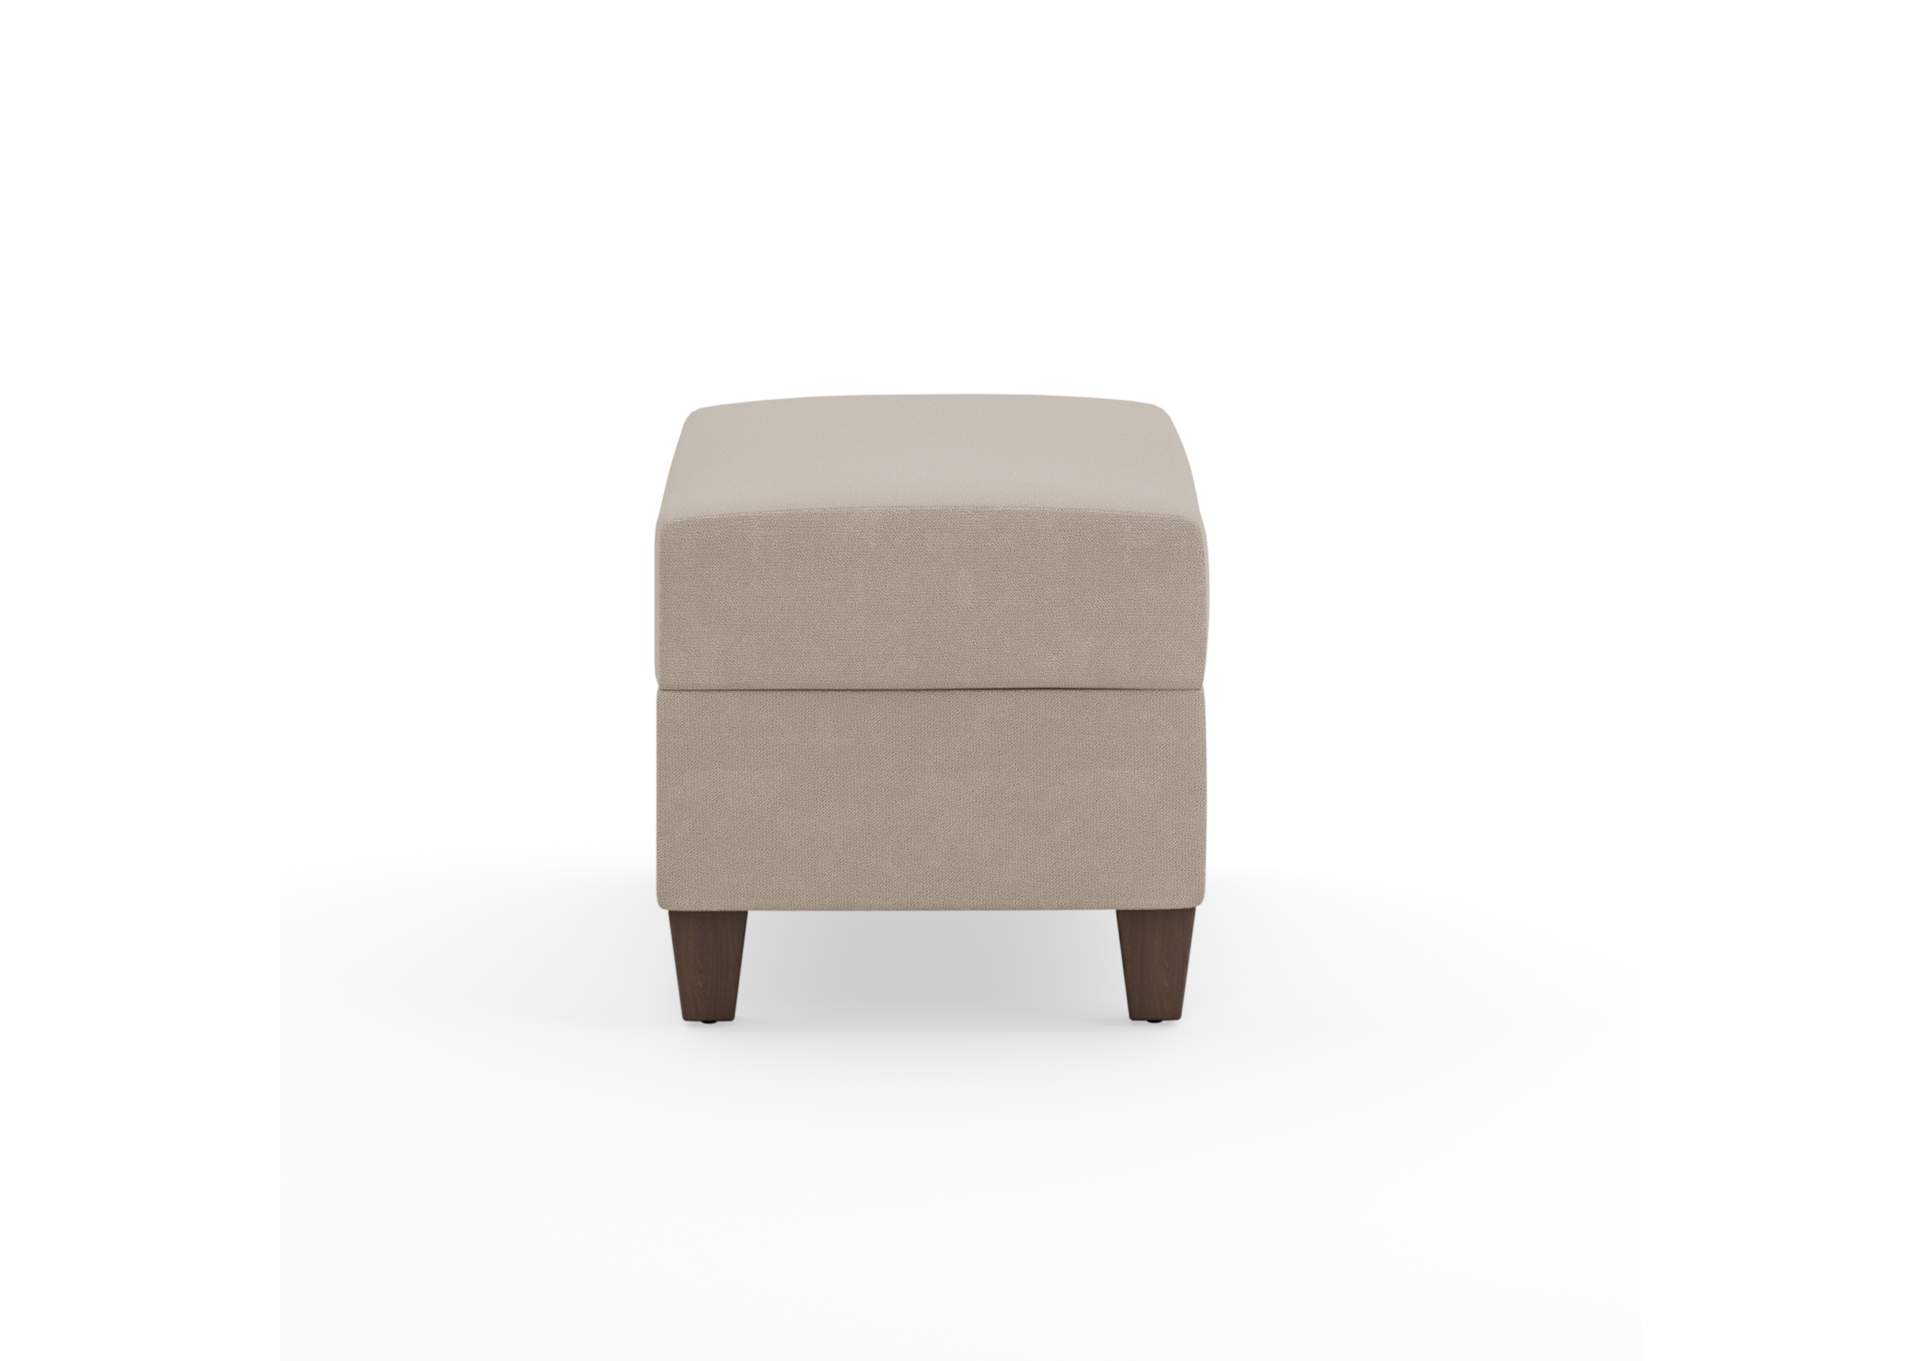 Dylan Ottoman By Homestyles,Homestyles